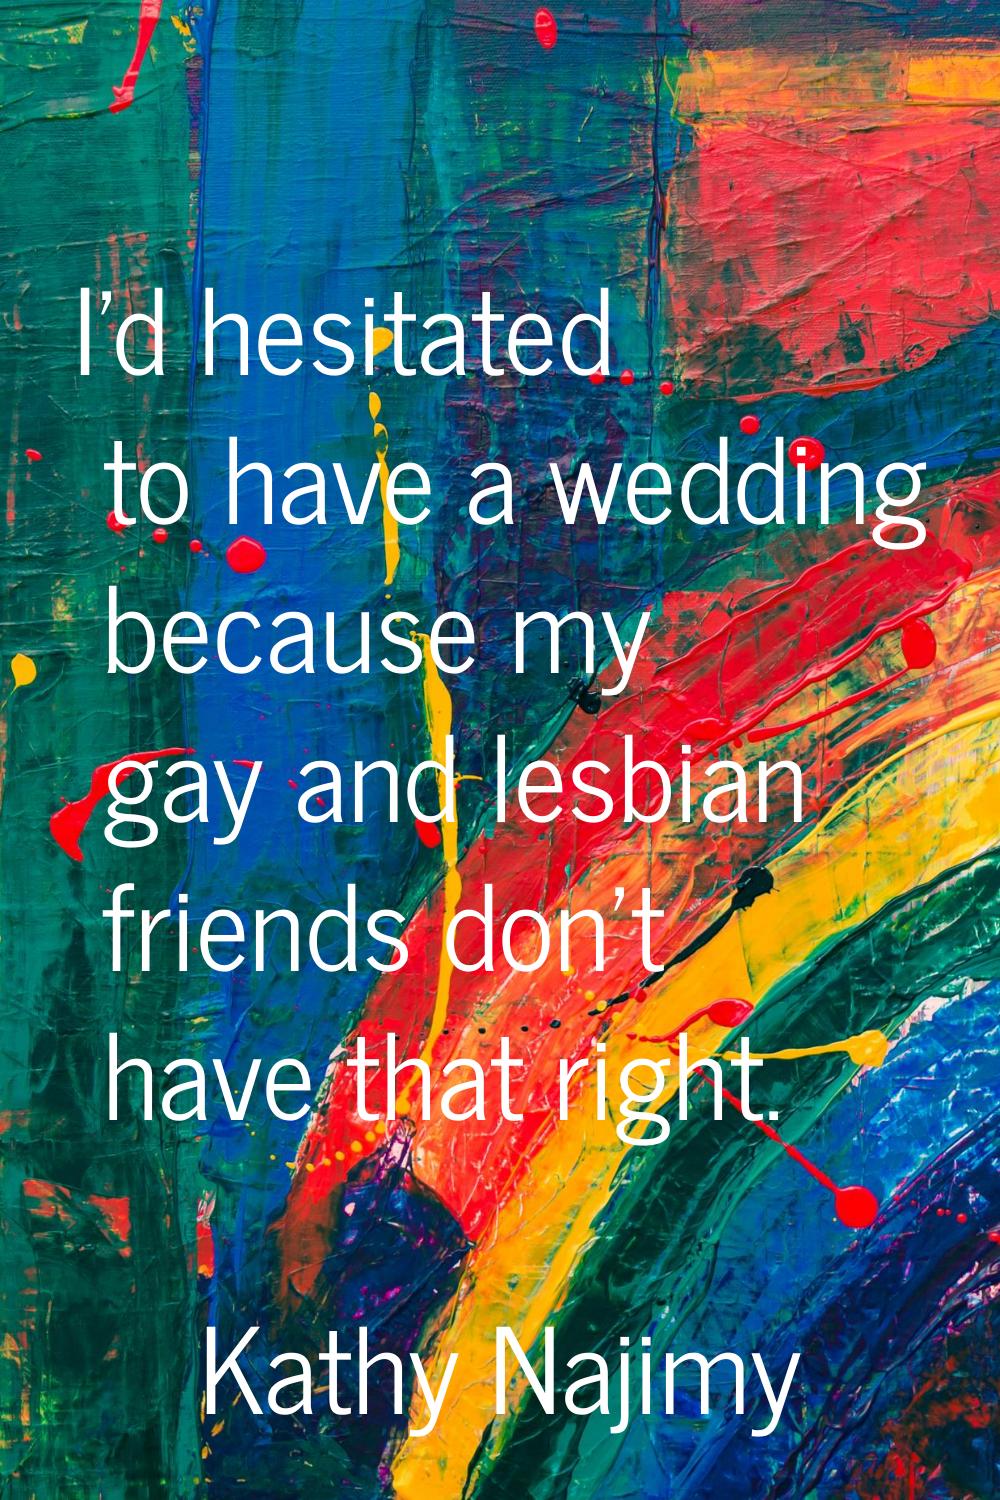 I'd hesitated to have a wedding because my gay and lesbian friends don't have that right.